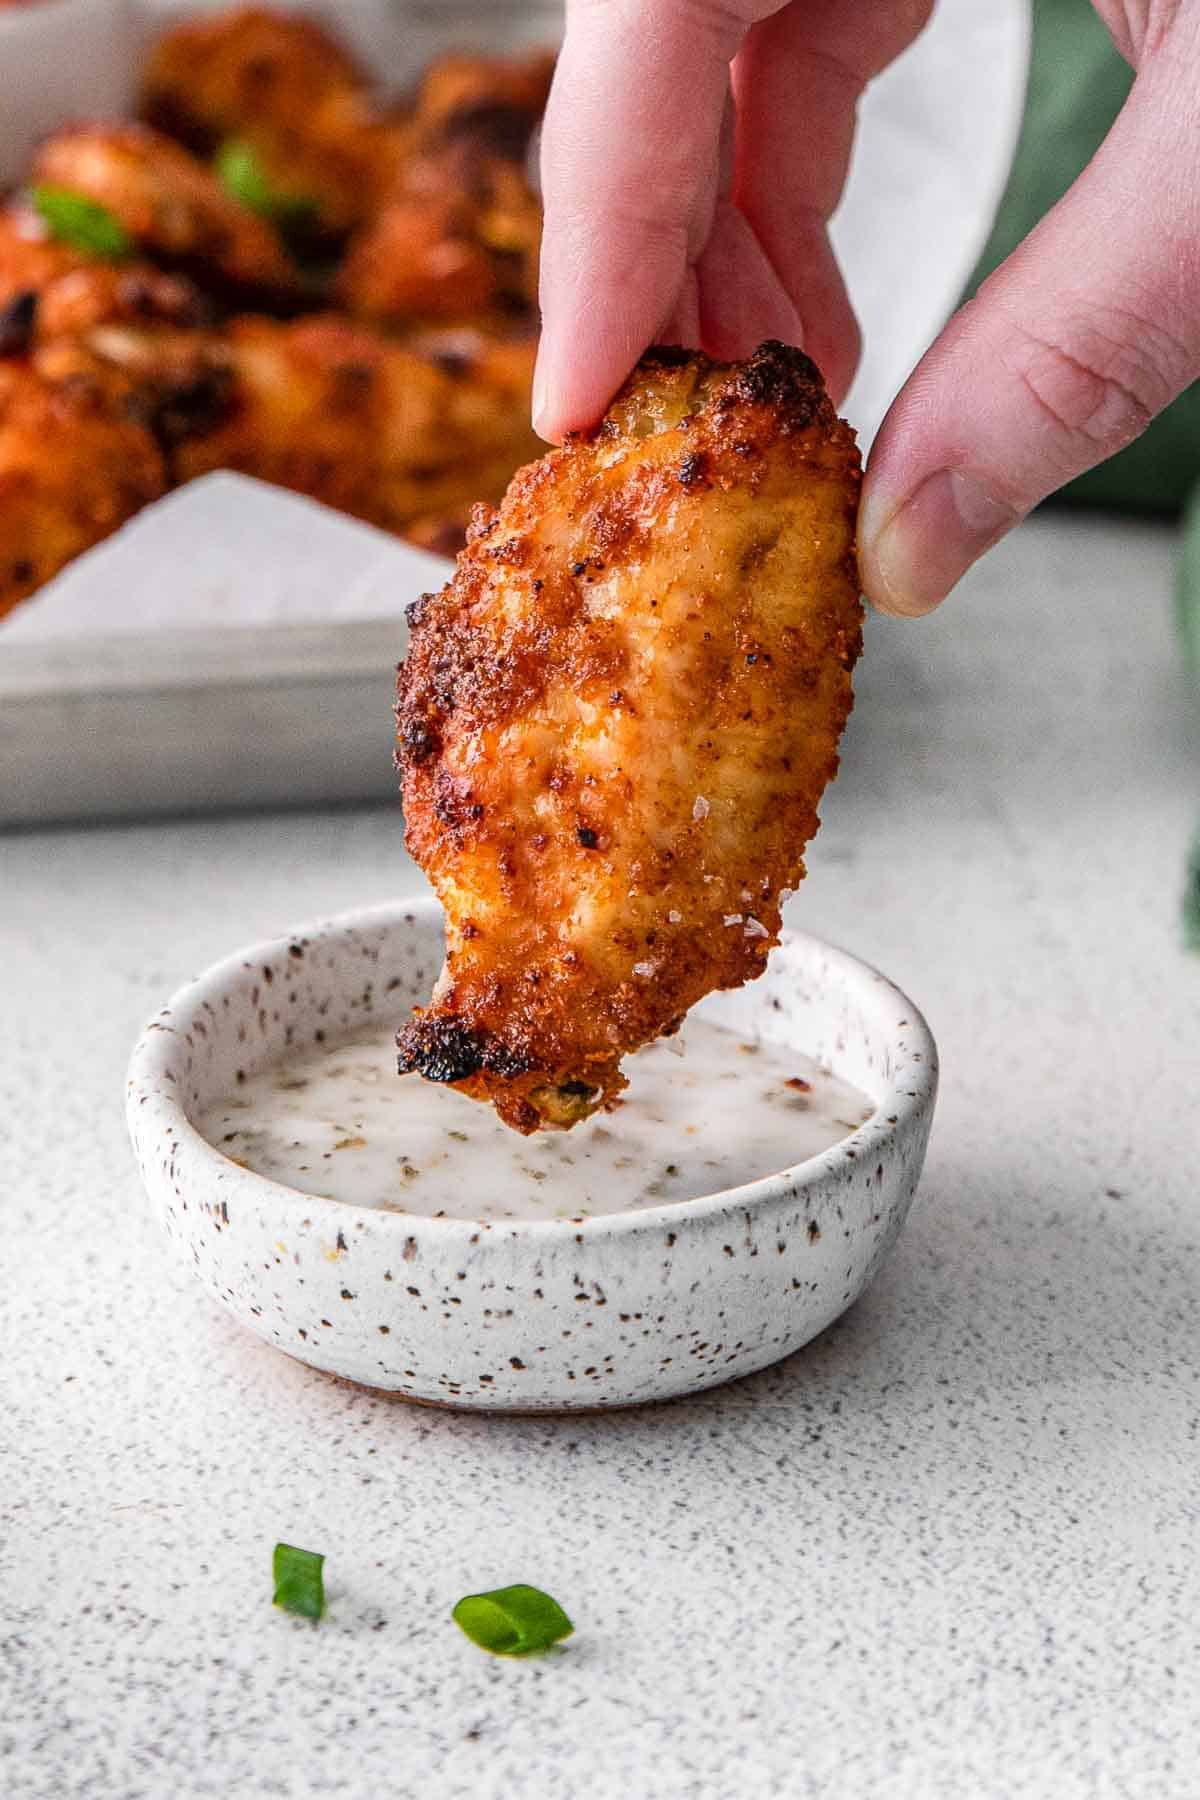 woman's fingers dipping a crispy chicken wing into ranch dresssing.